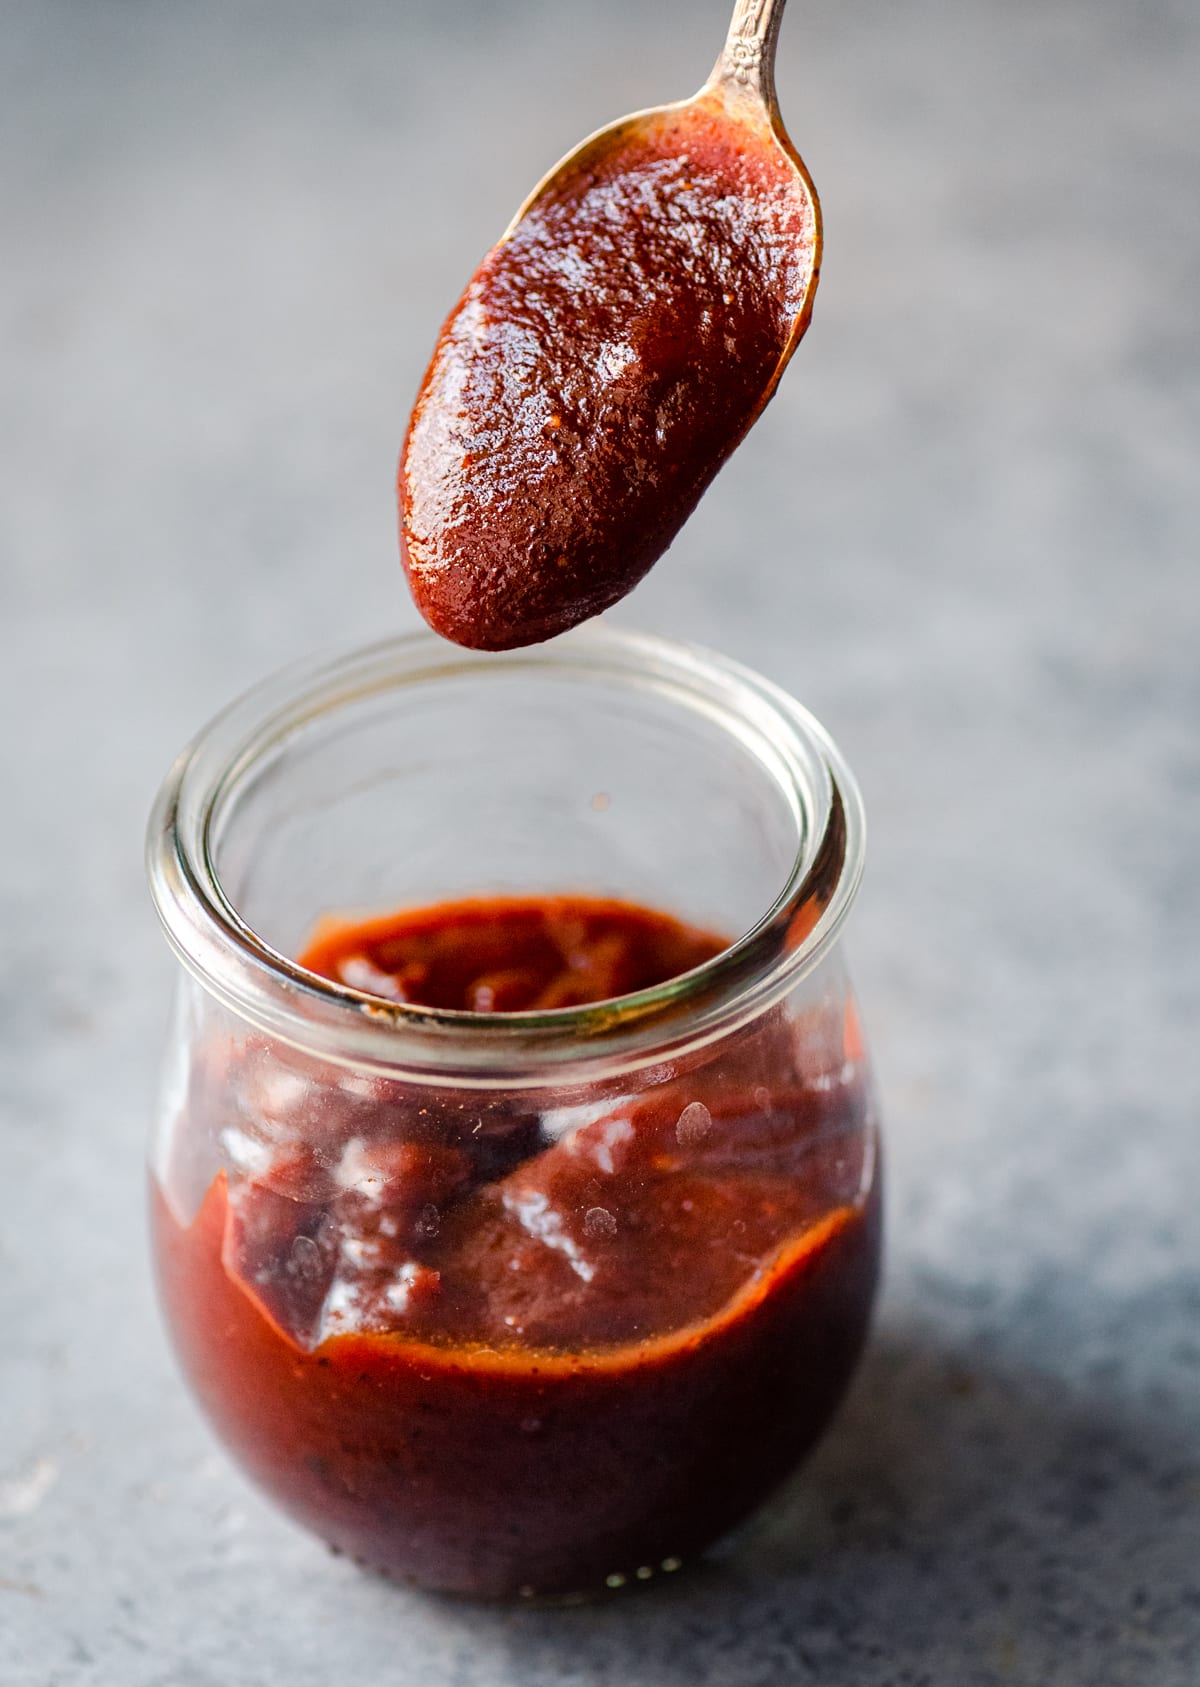 Is Ketchup Vegan? Your Guide to Vegan Condiments